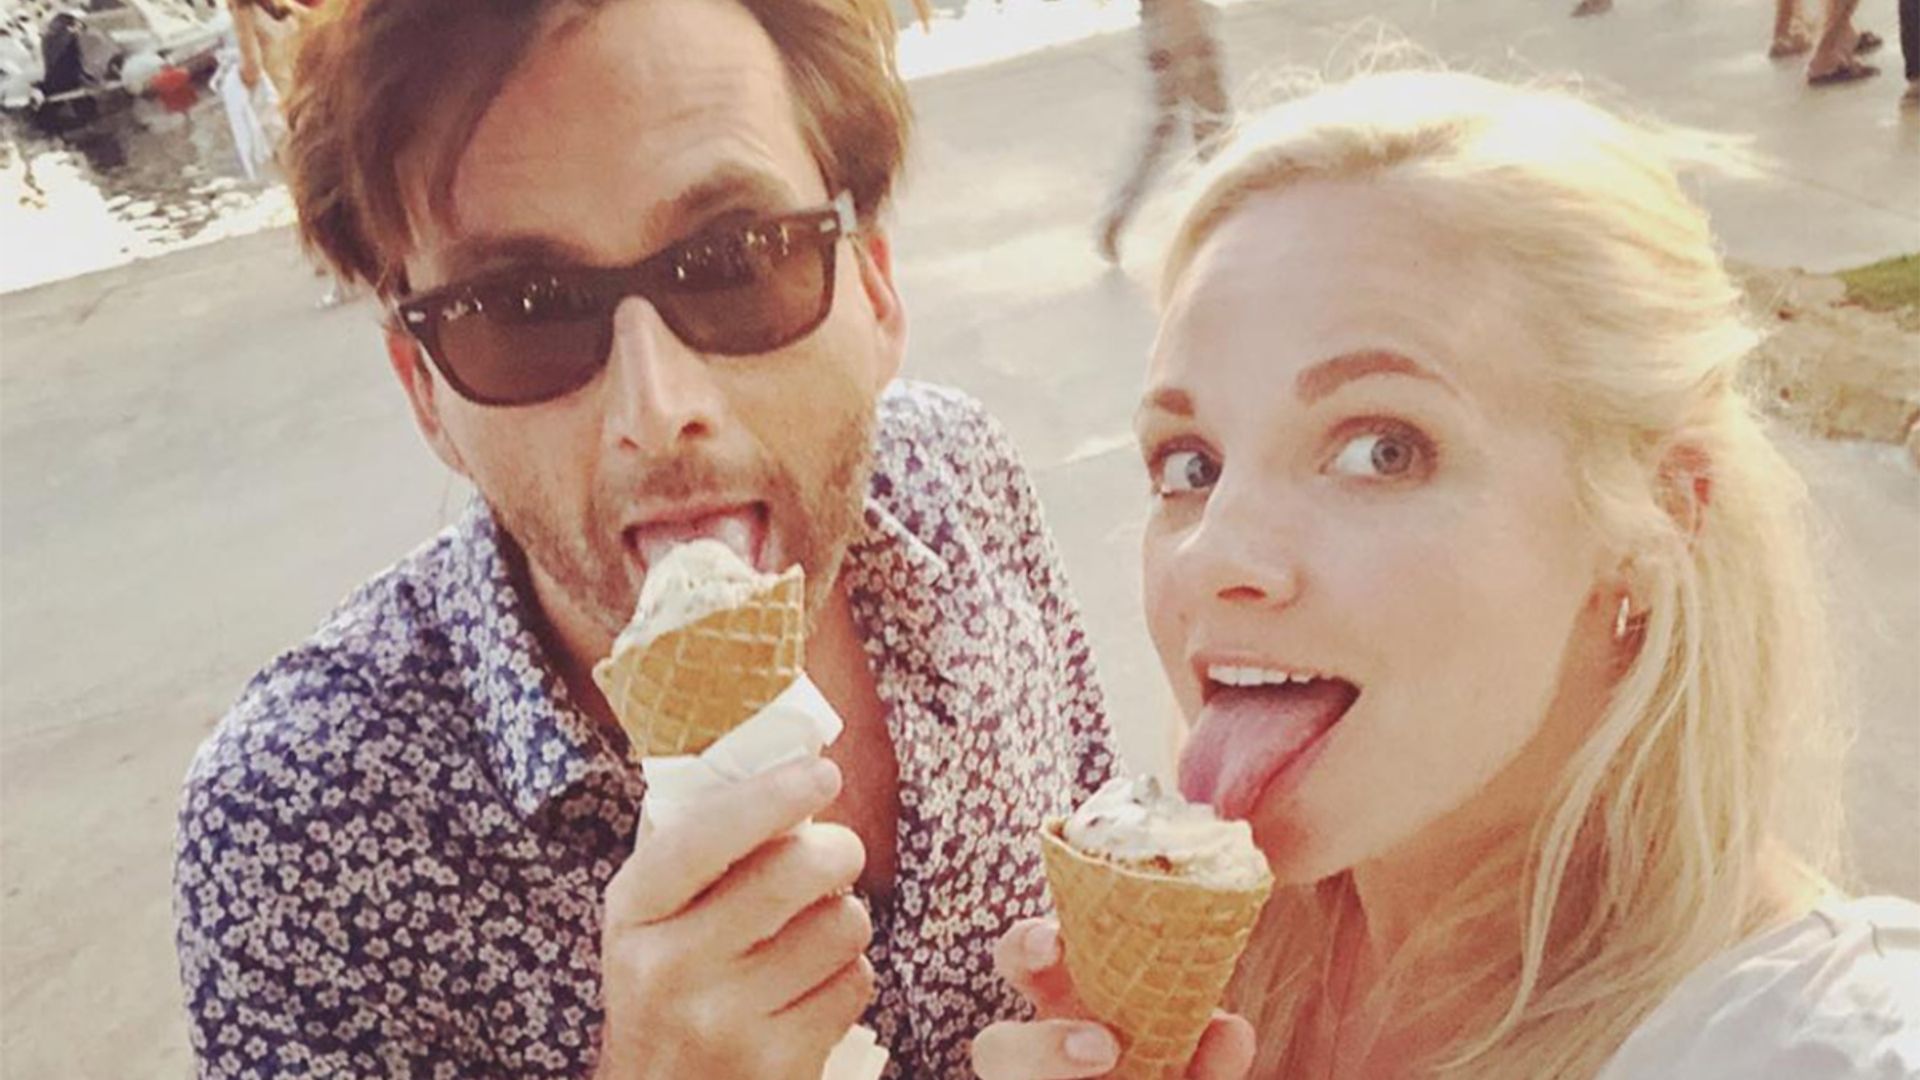 David Tennant's wife Georgia shares throwback family photo - as fans praise her funny hashtags!